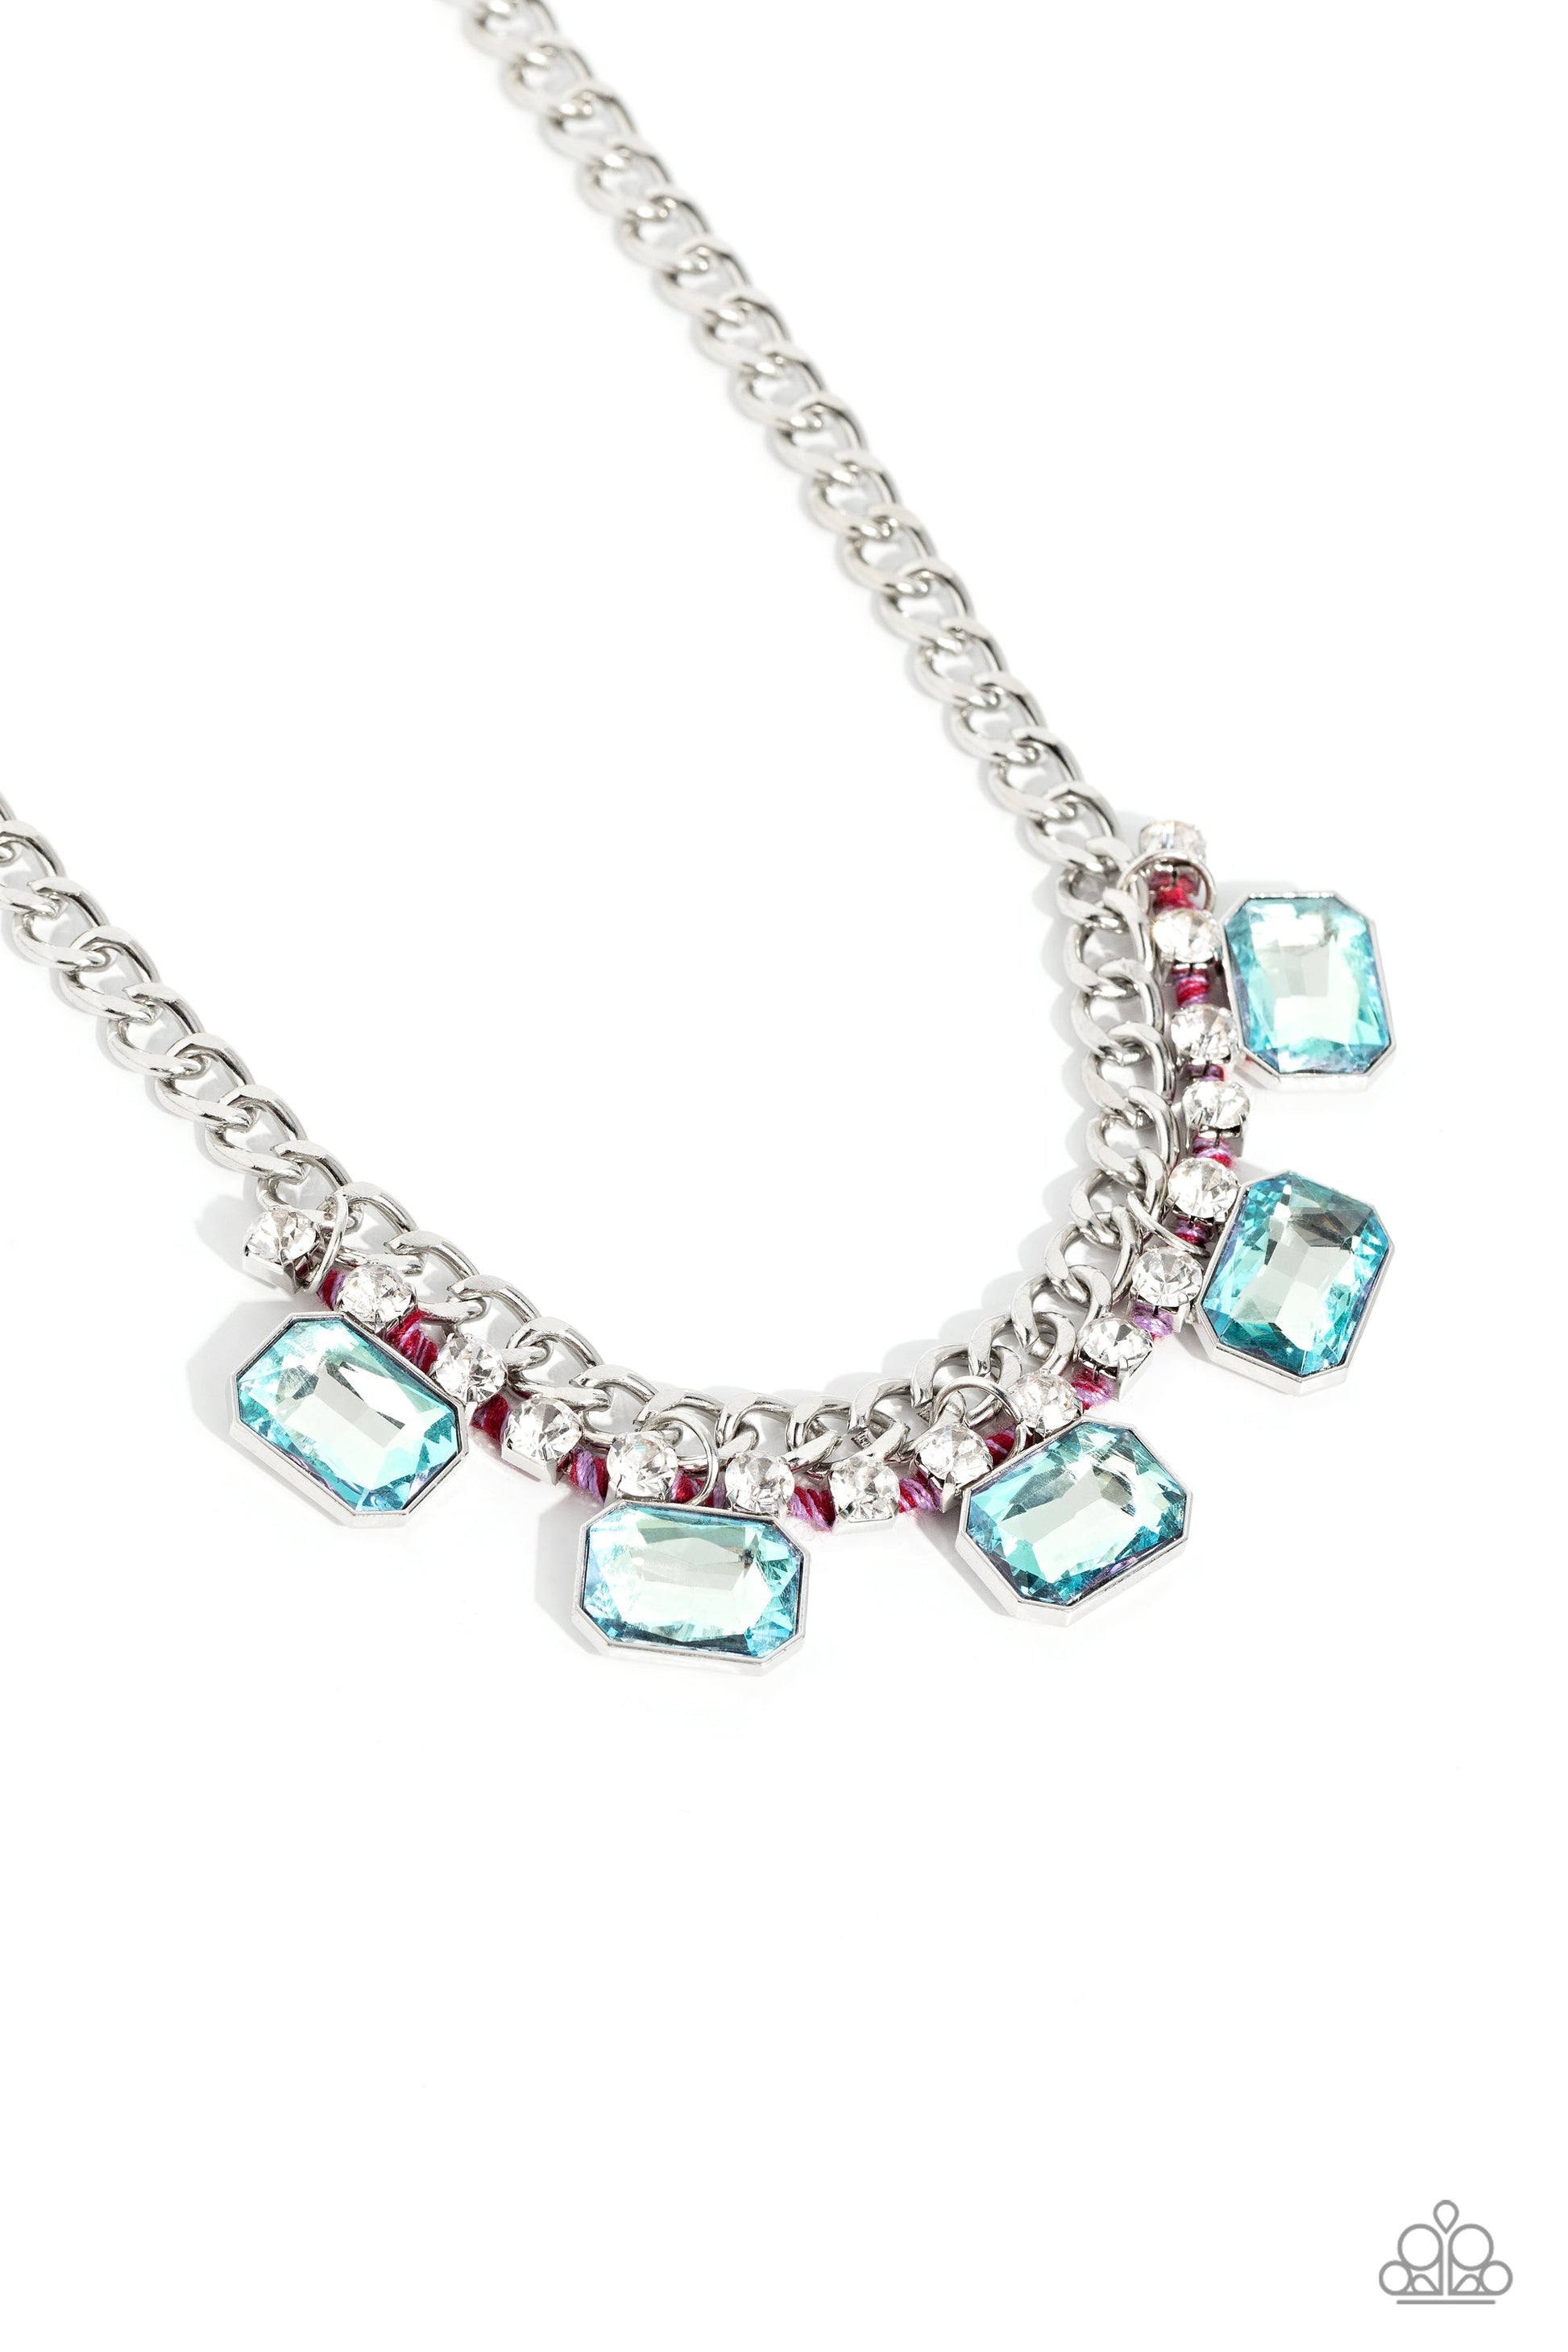 WEAVING Wonder - Multi Color Gem Necklace - Paparazzi Accessories - Brushed in a high-sheen finish, a strand of flat silver curb chain dramatically drapes across the chest for a bold industrial look. A row of faceted light blue emerald-cut gems cascade from the bottom of a strand of glittery white rhinestones set in silver square fittings and ornately woven in Viva Magenta and purple cording for a modern look.